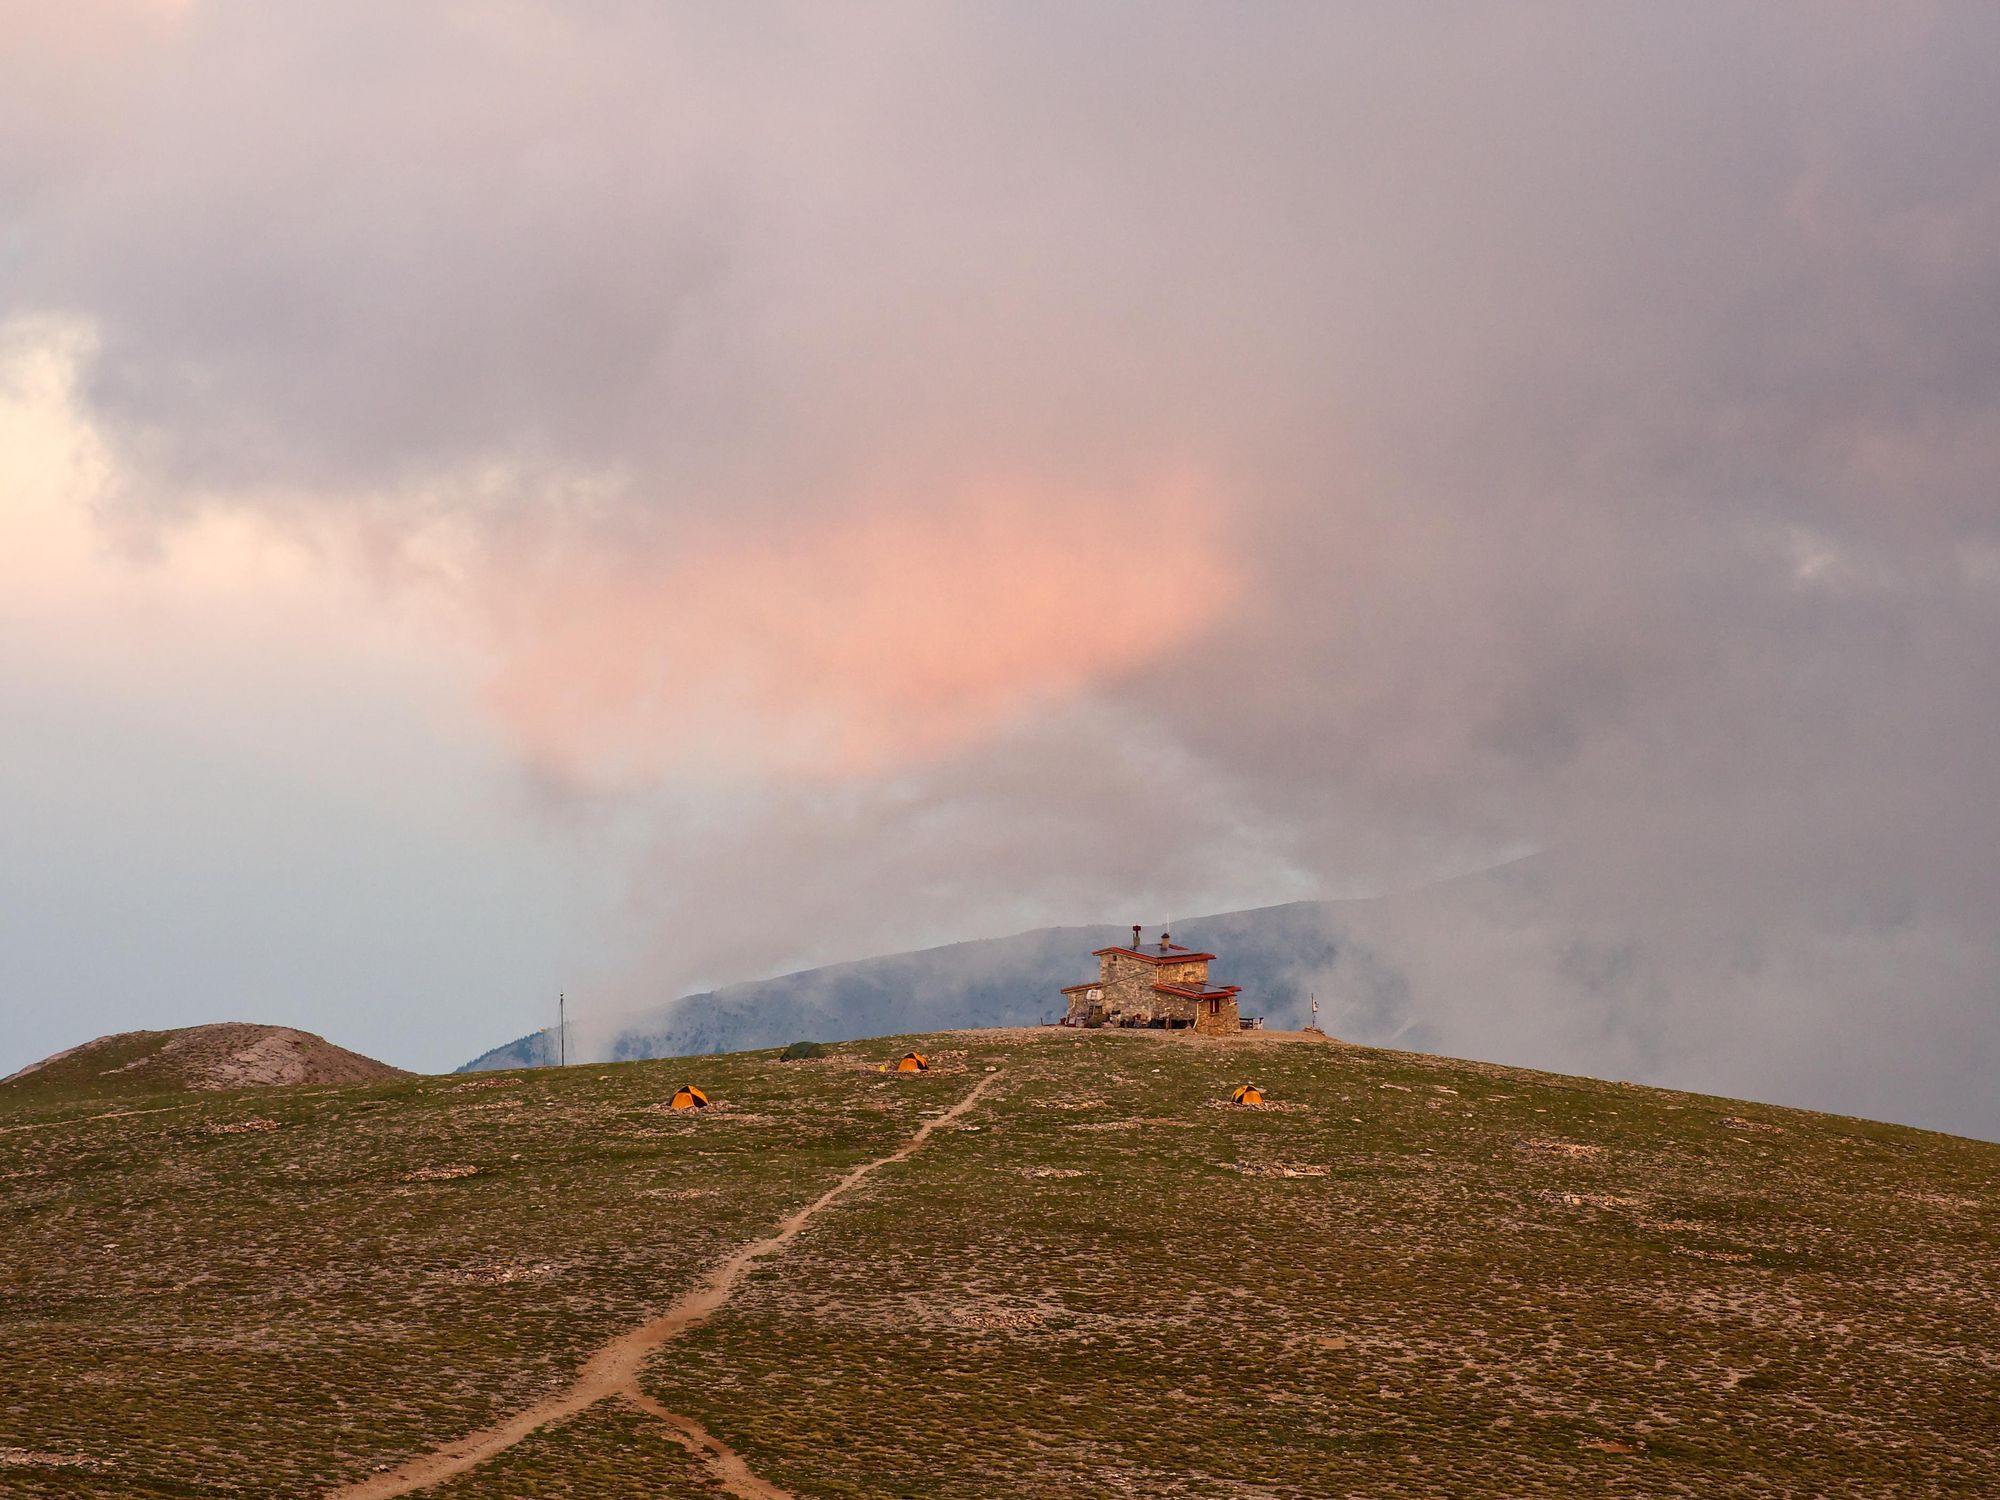 A view out over the Muses Plateau and the Christos Kakkalos Refuge on Mount Olympus. Photo: Getty